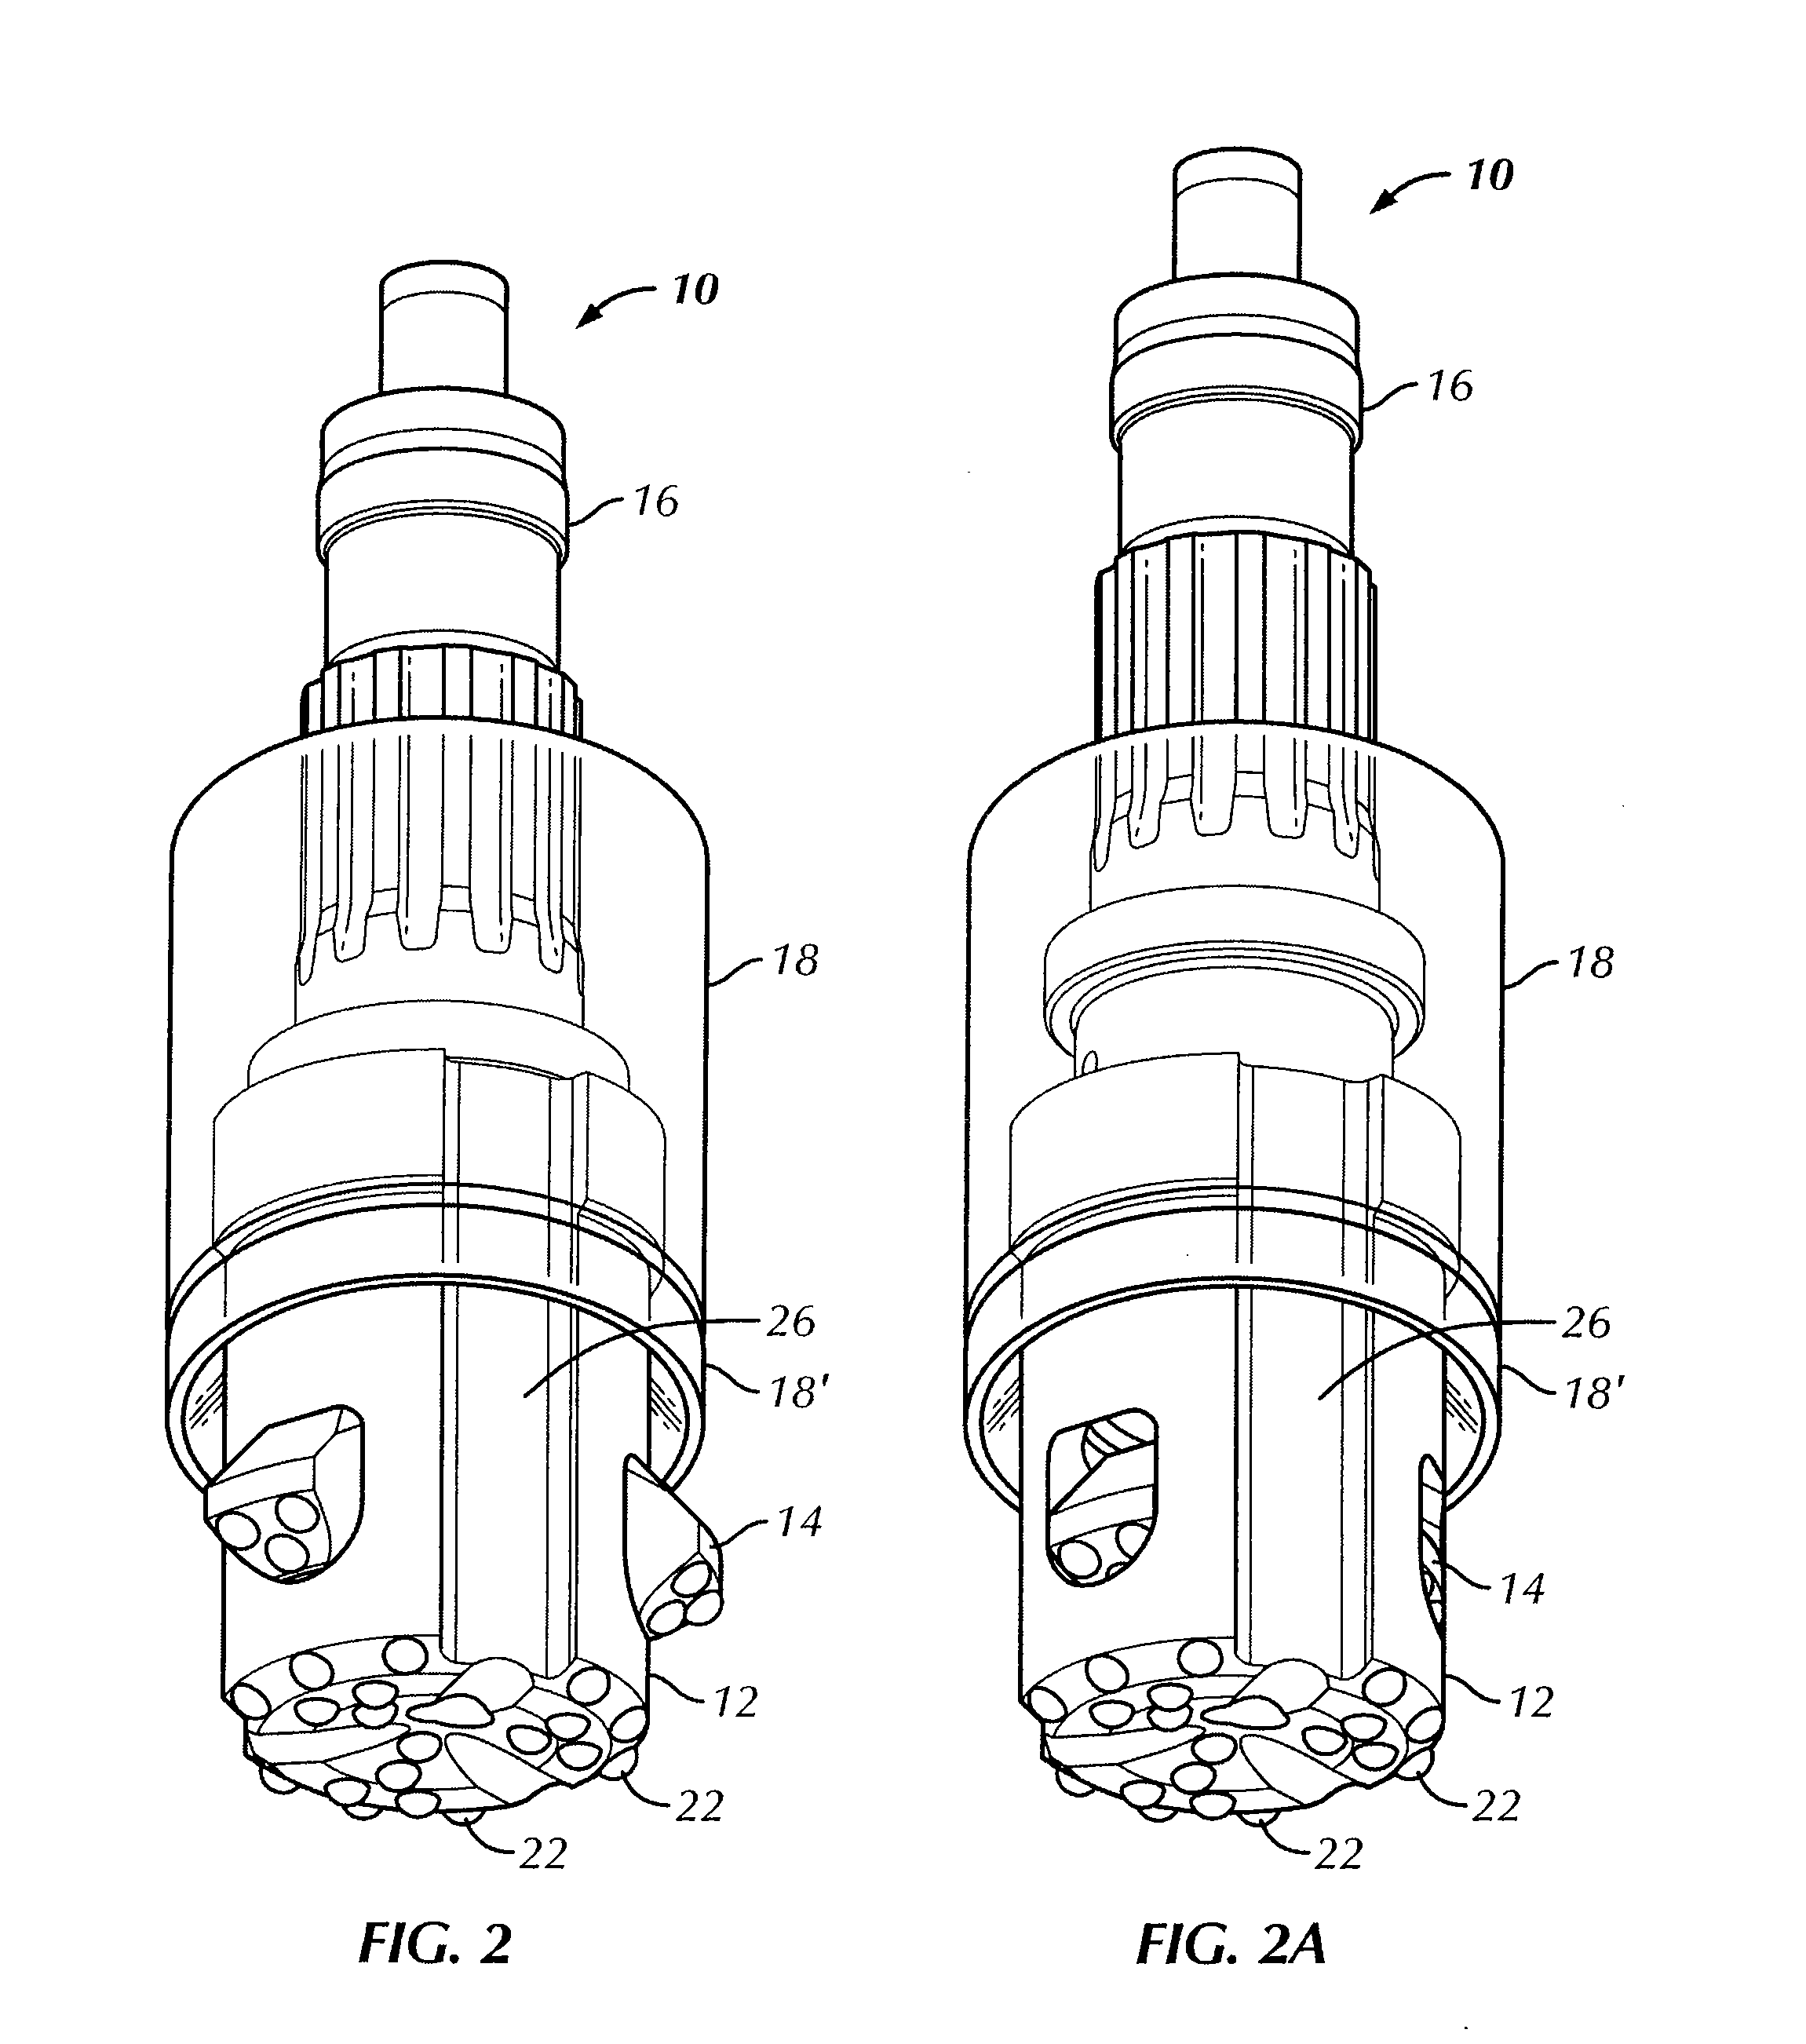 Down-the-hole drill hammer having an extendable drill bit assembly